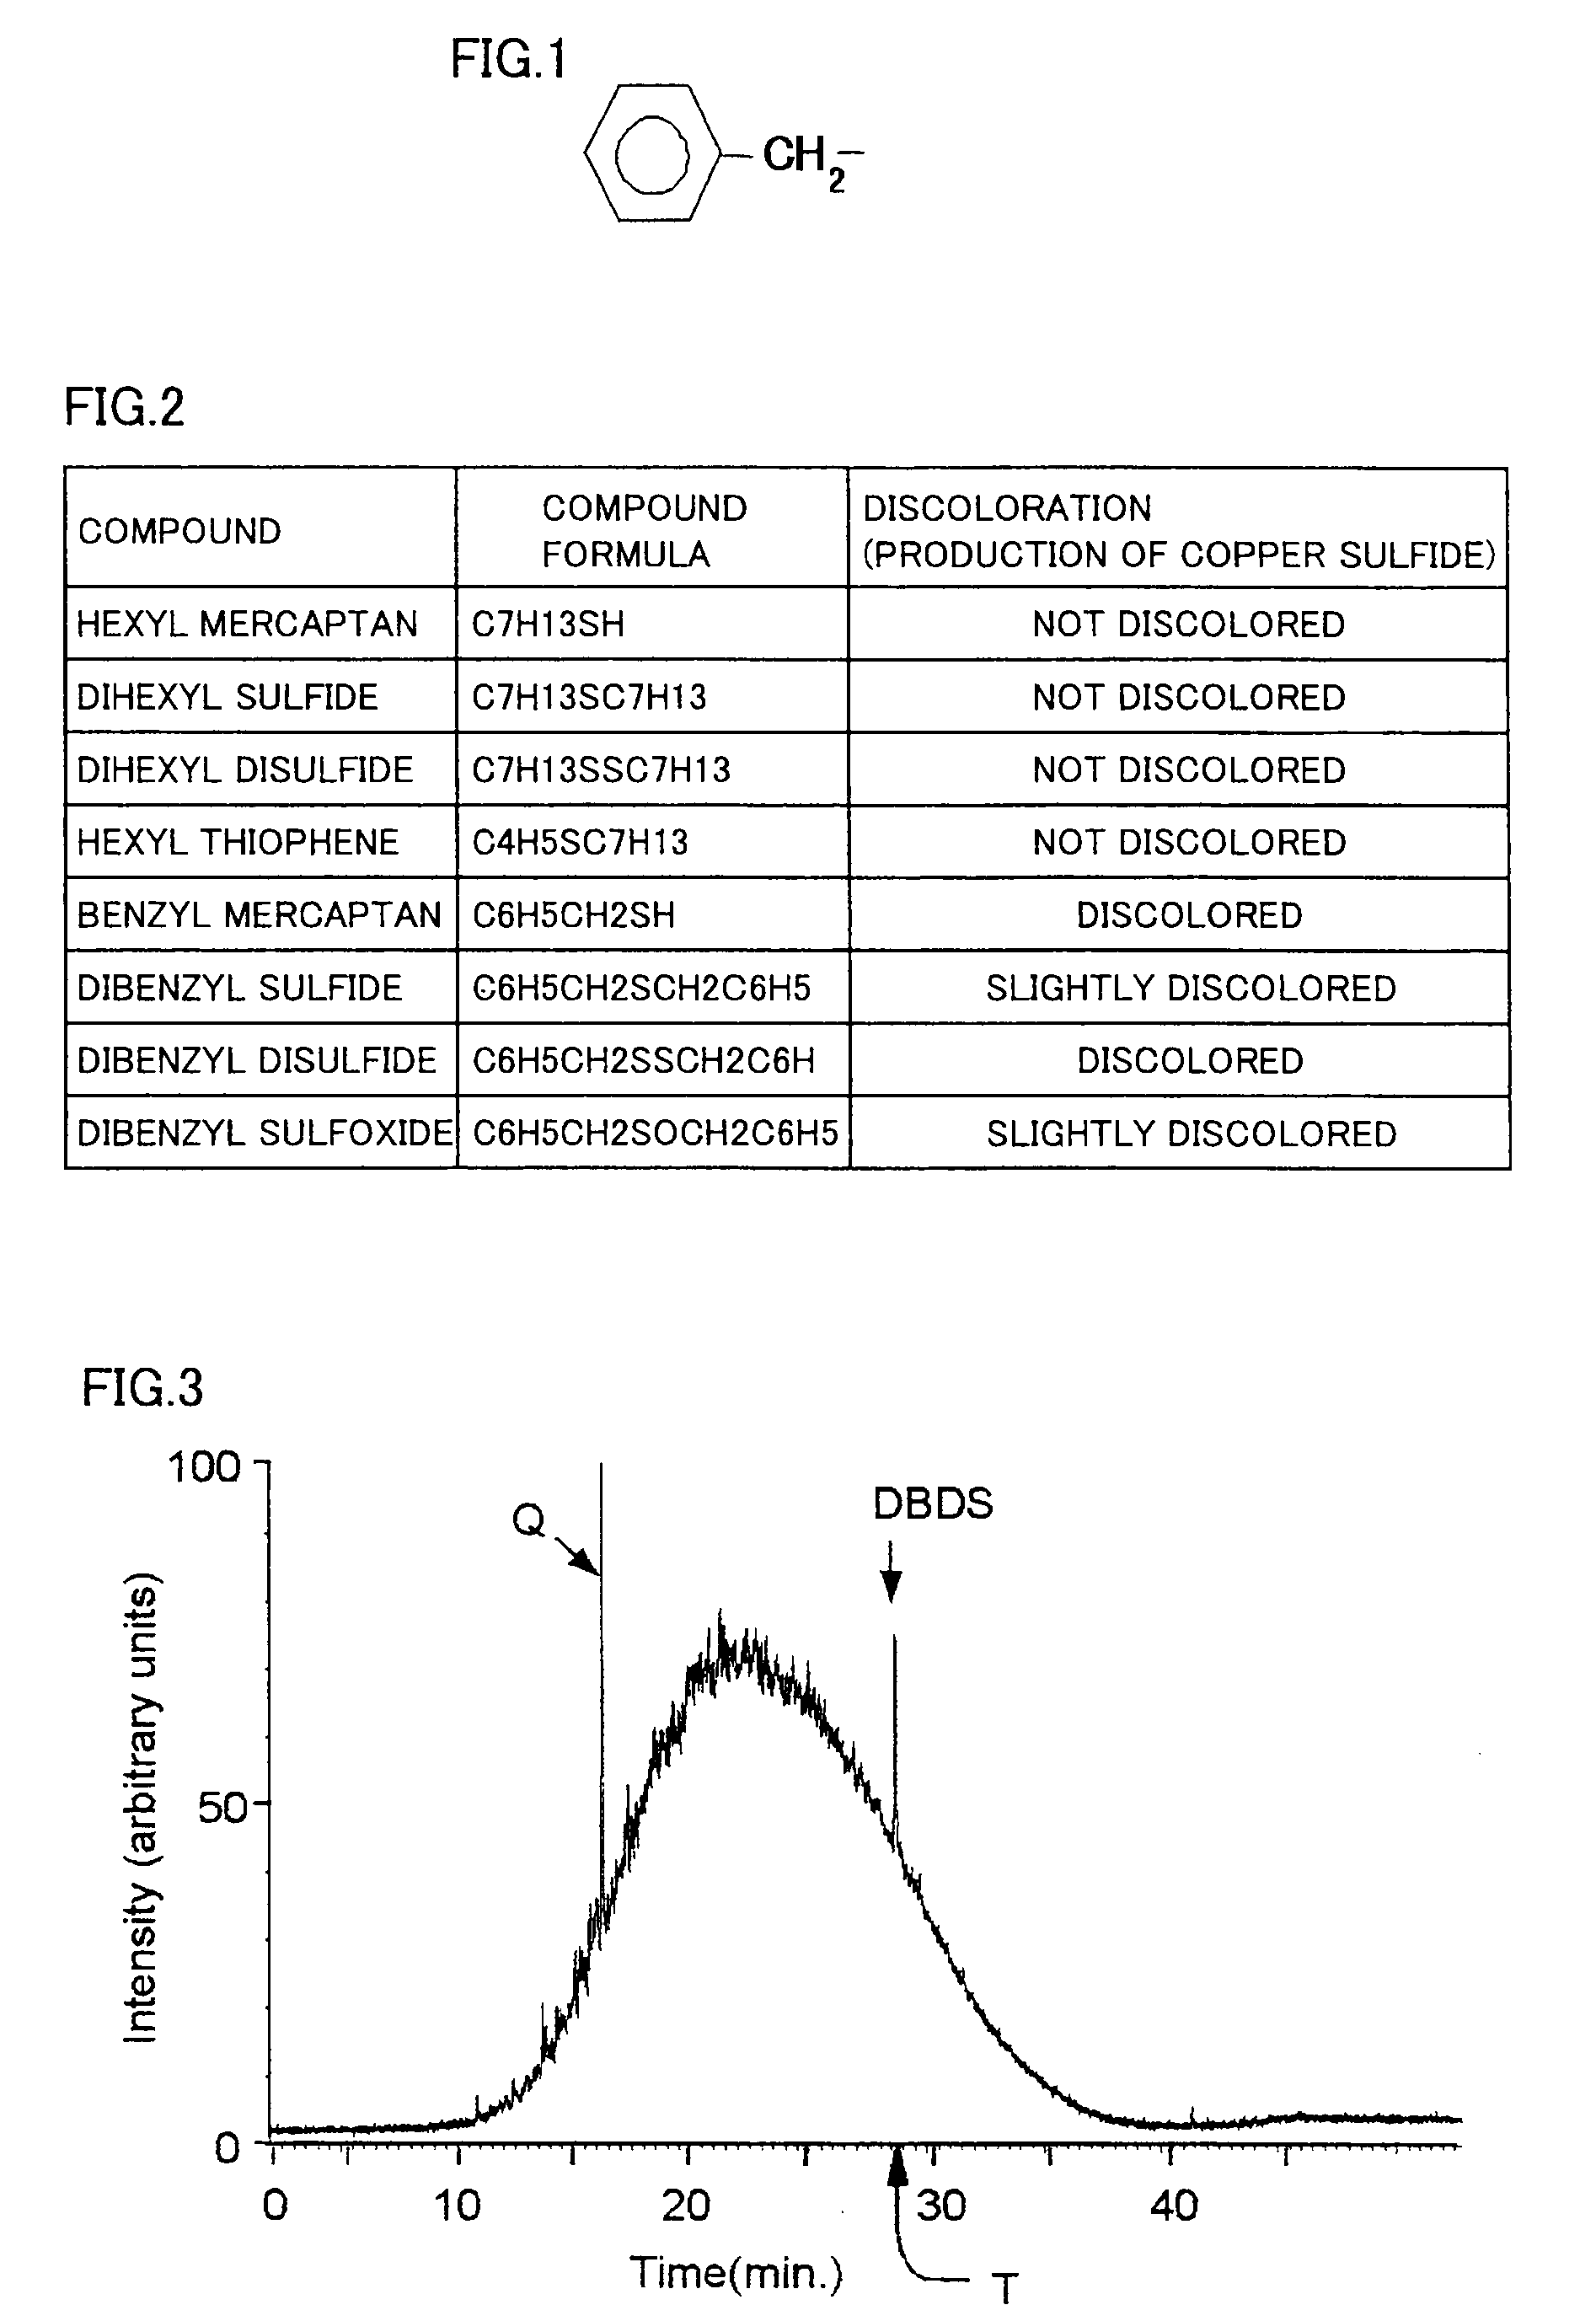 Diagnostic method for oil-filled electrical apparatus